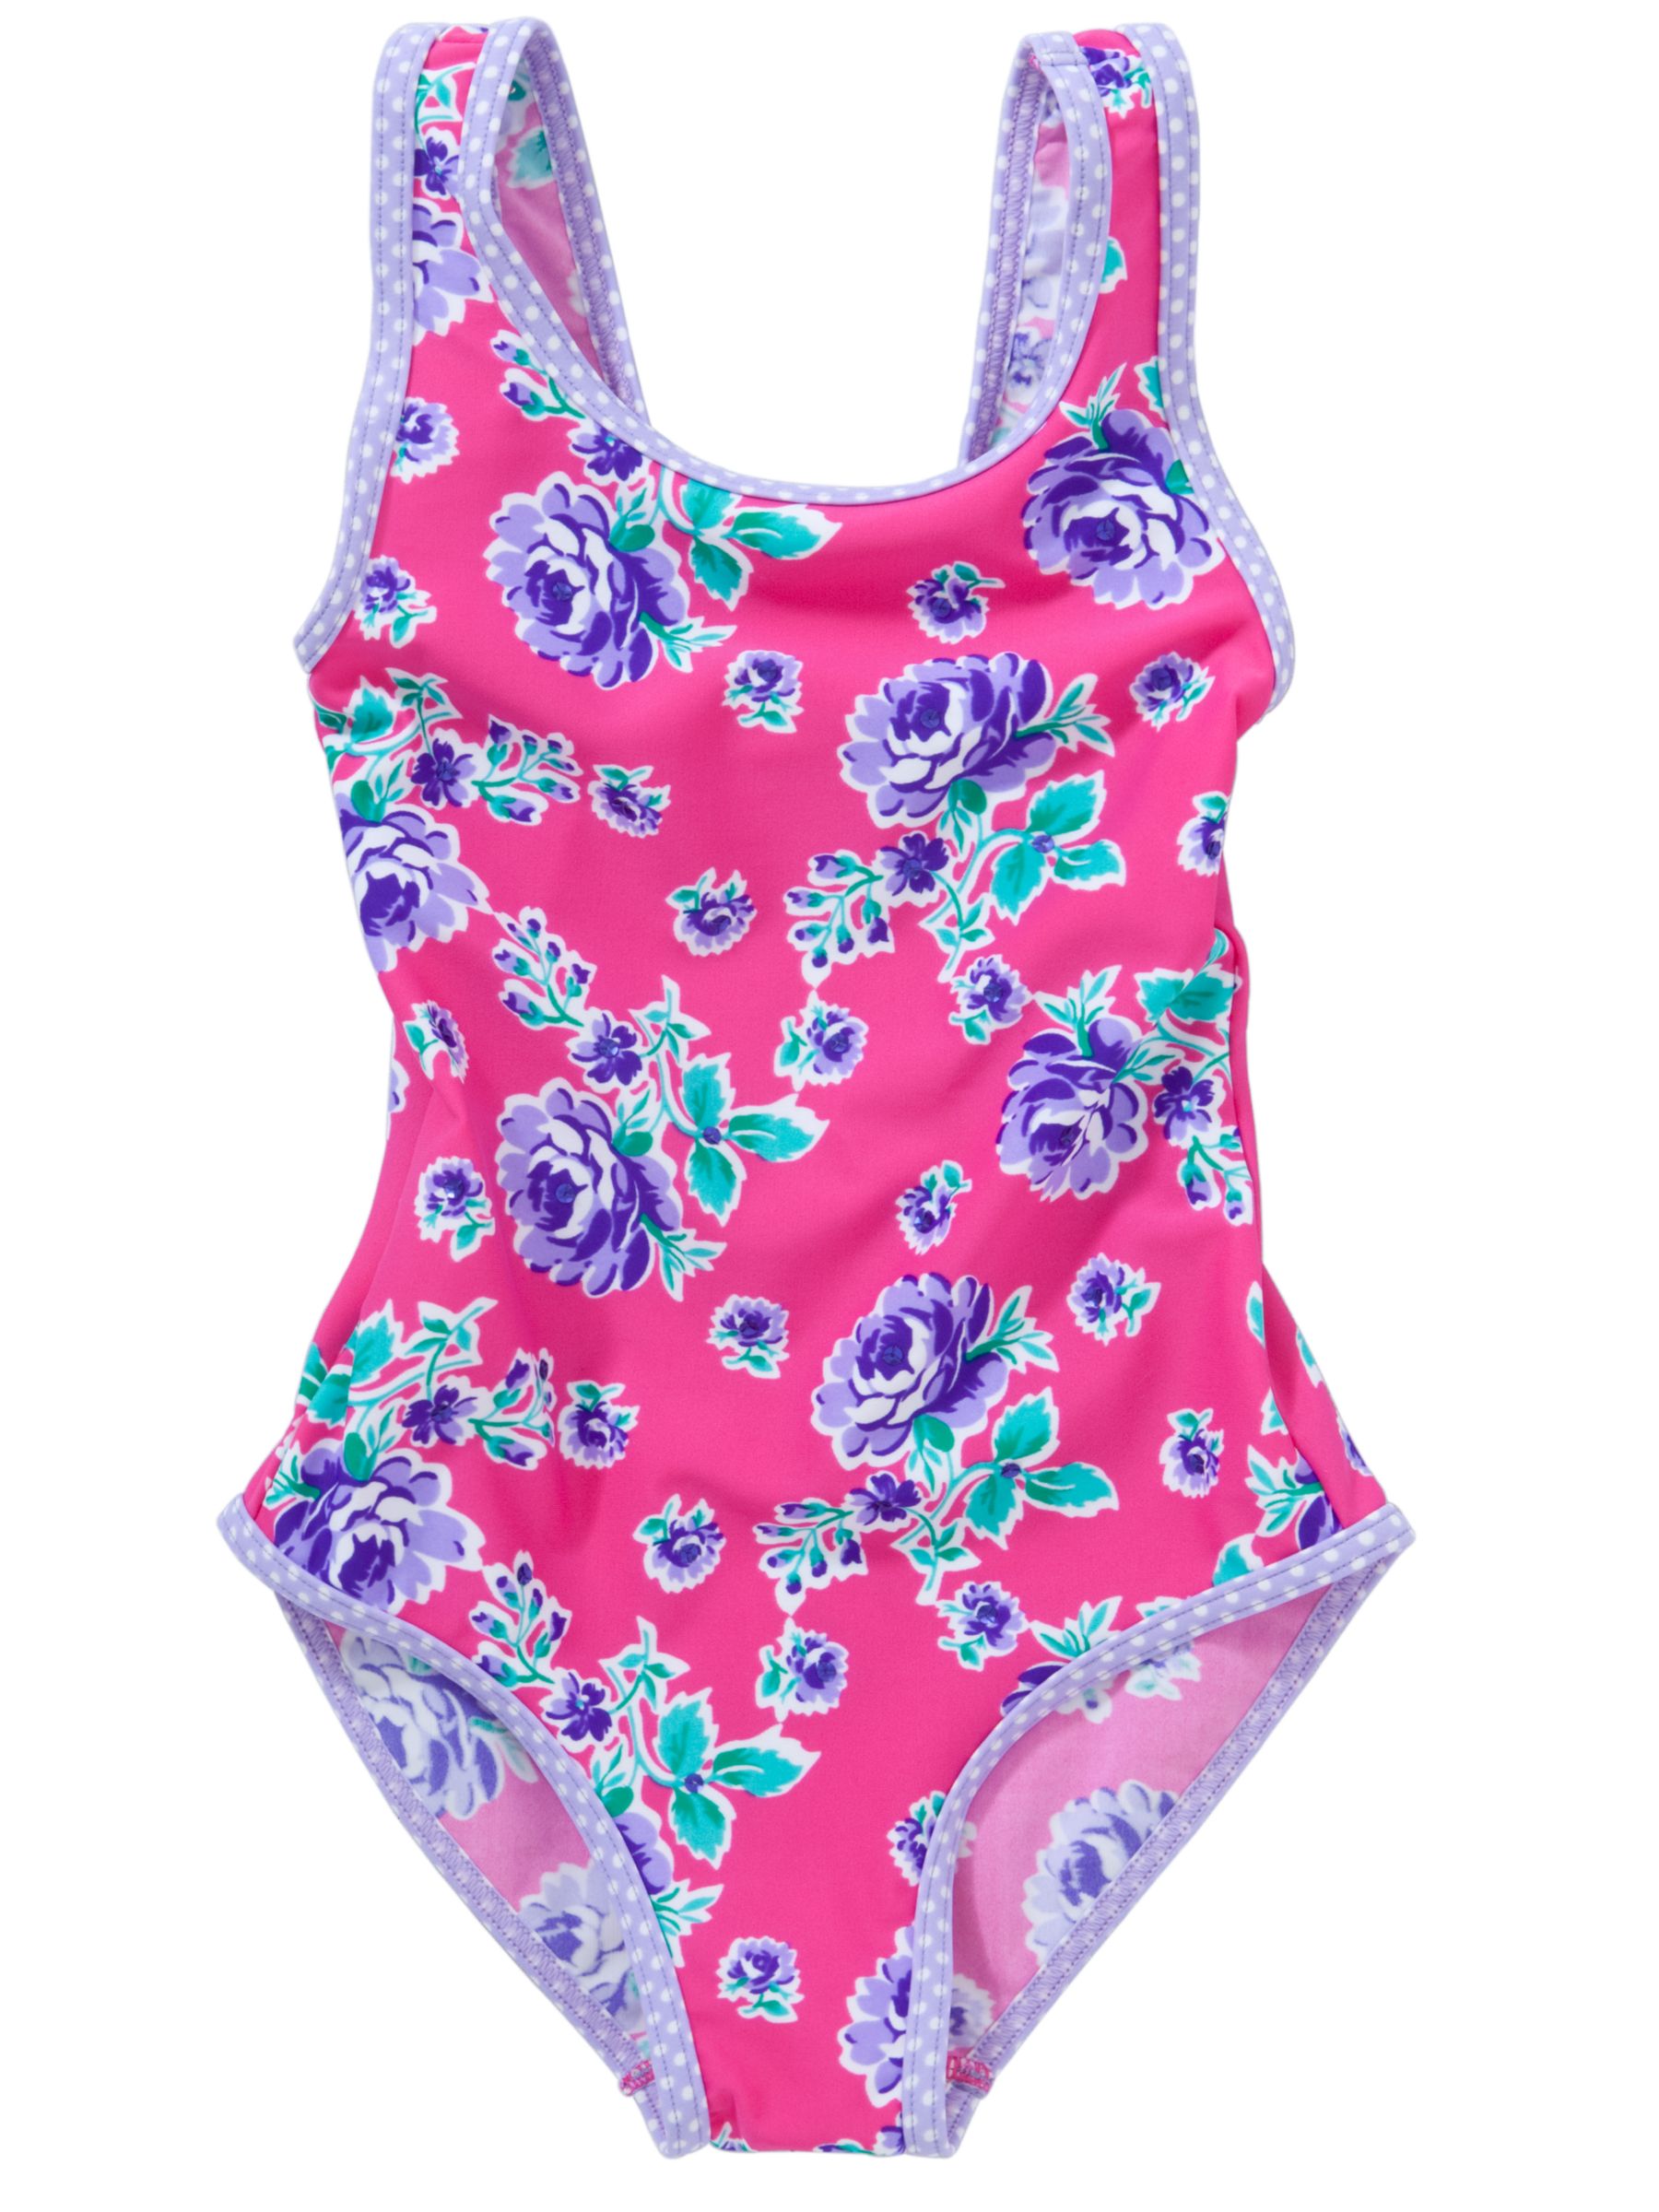 John Lewis Girl All Over Print Floral Swimsuit,